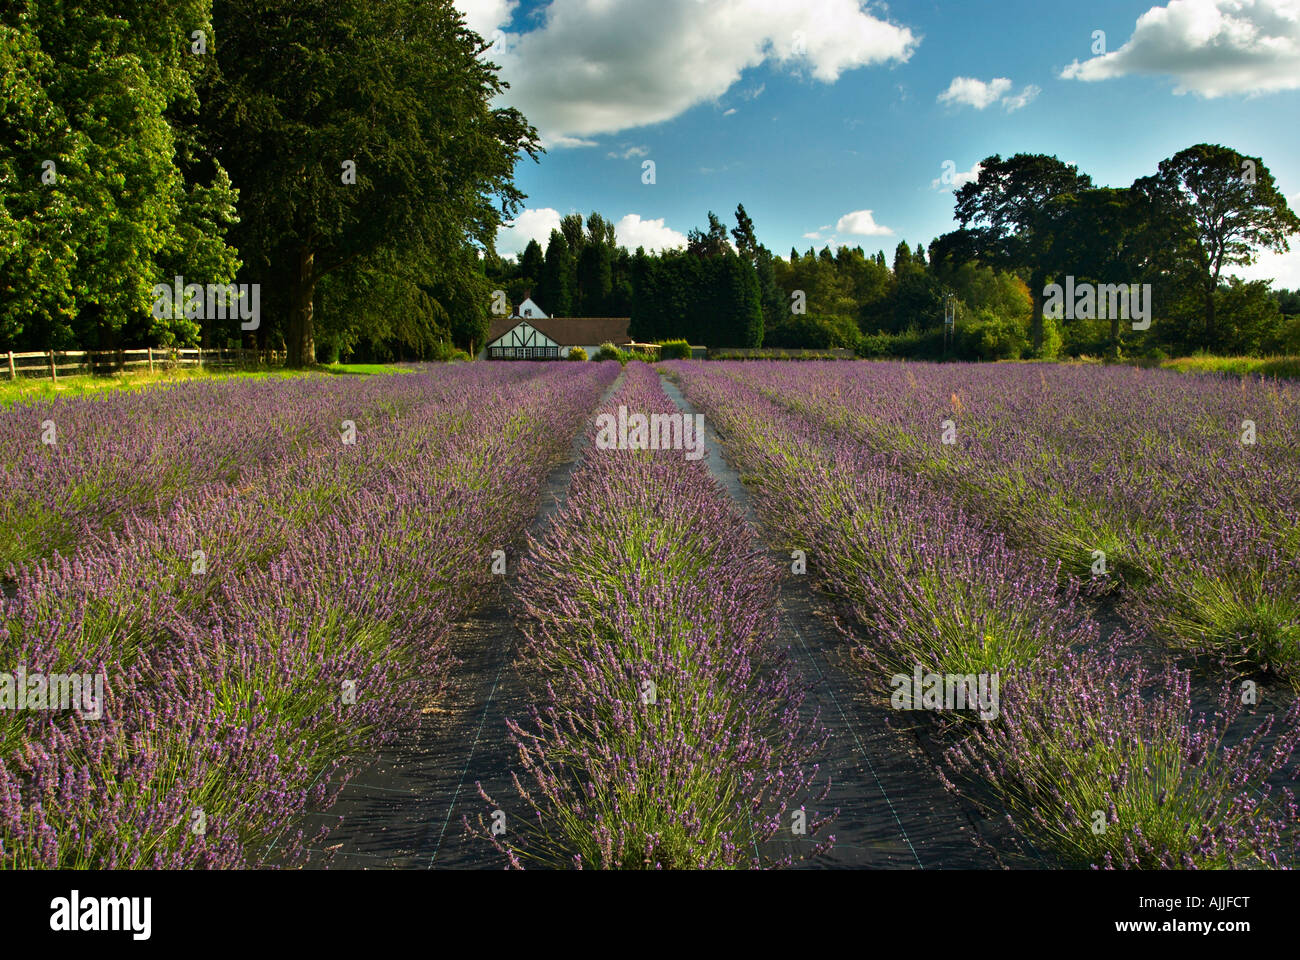 A House By Lavender Fields At Swettenham Cheshire UK Stock Photo